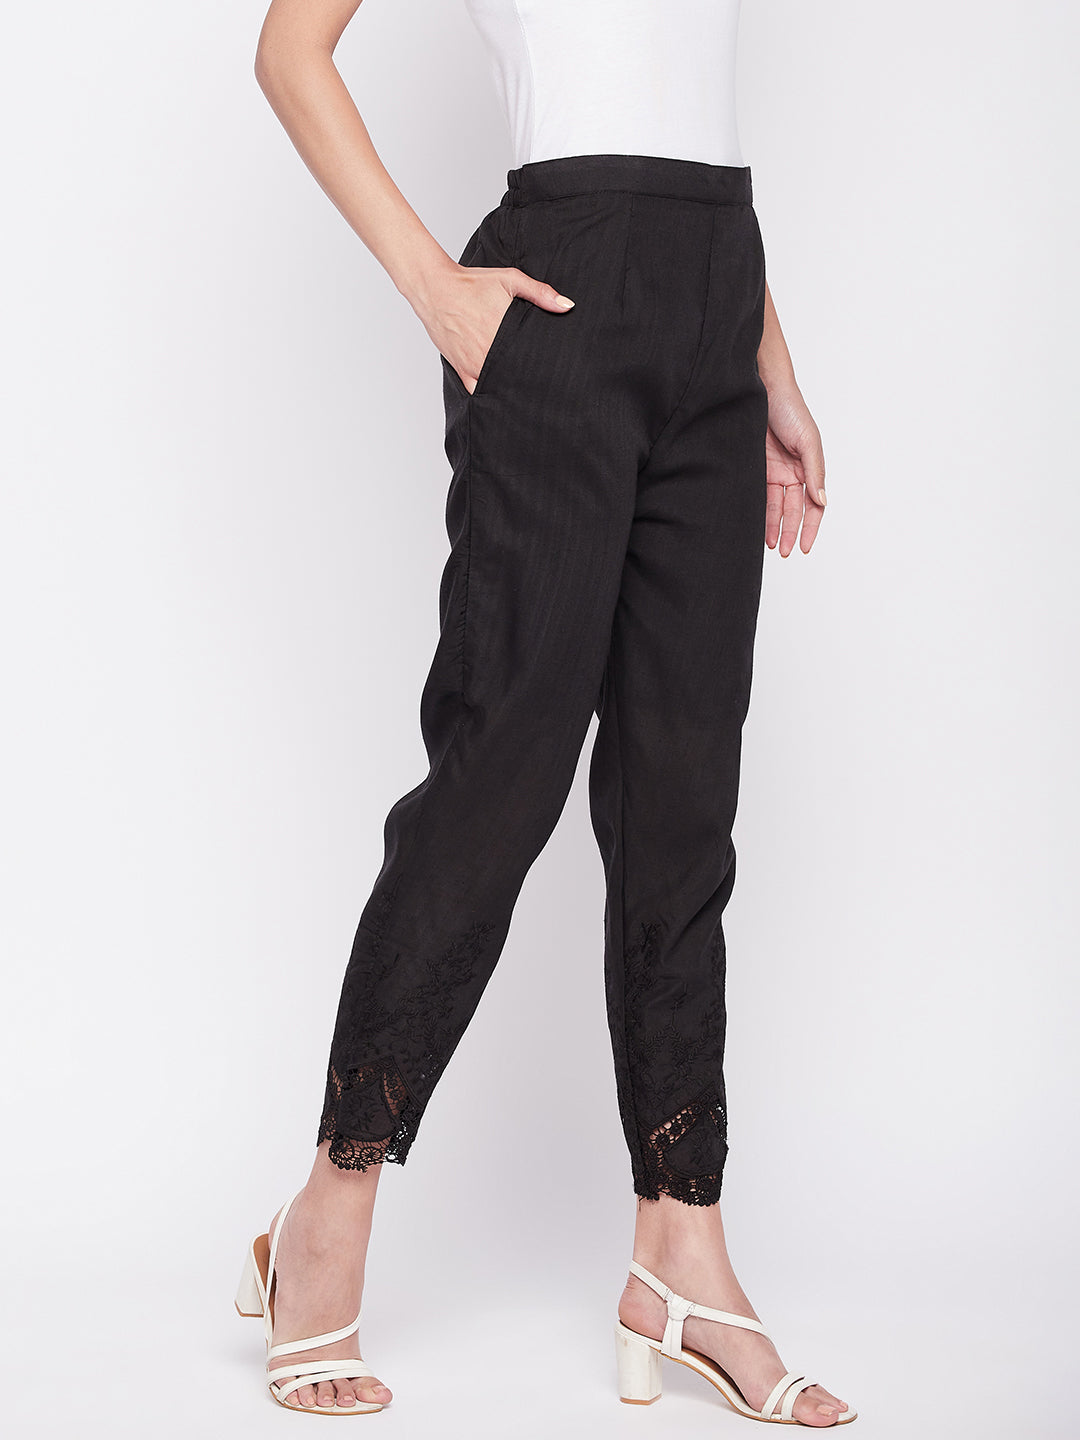 Clora Black Solid Cotton Embroidered Pant